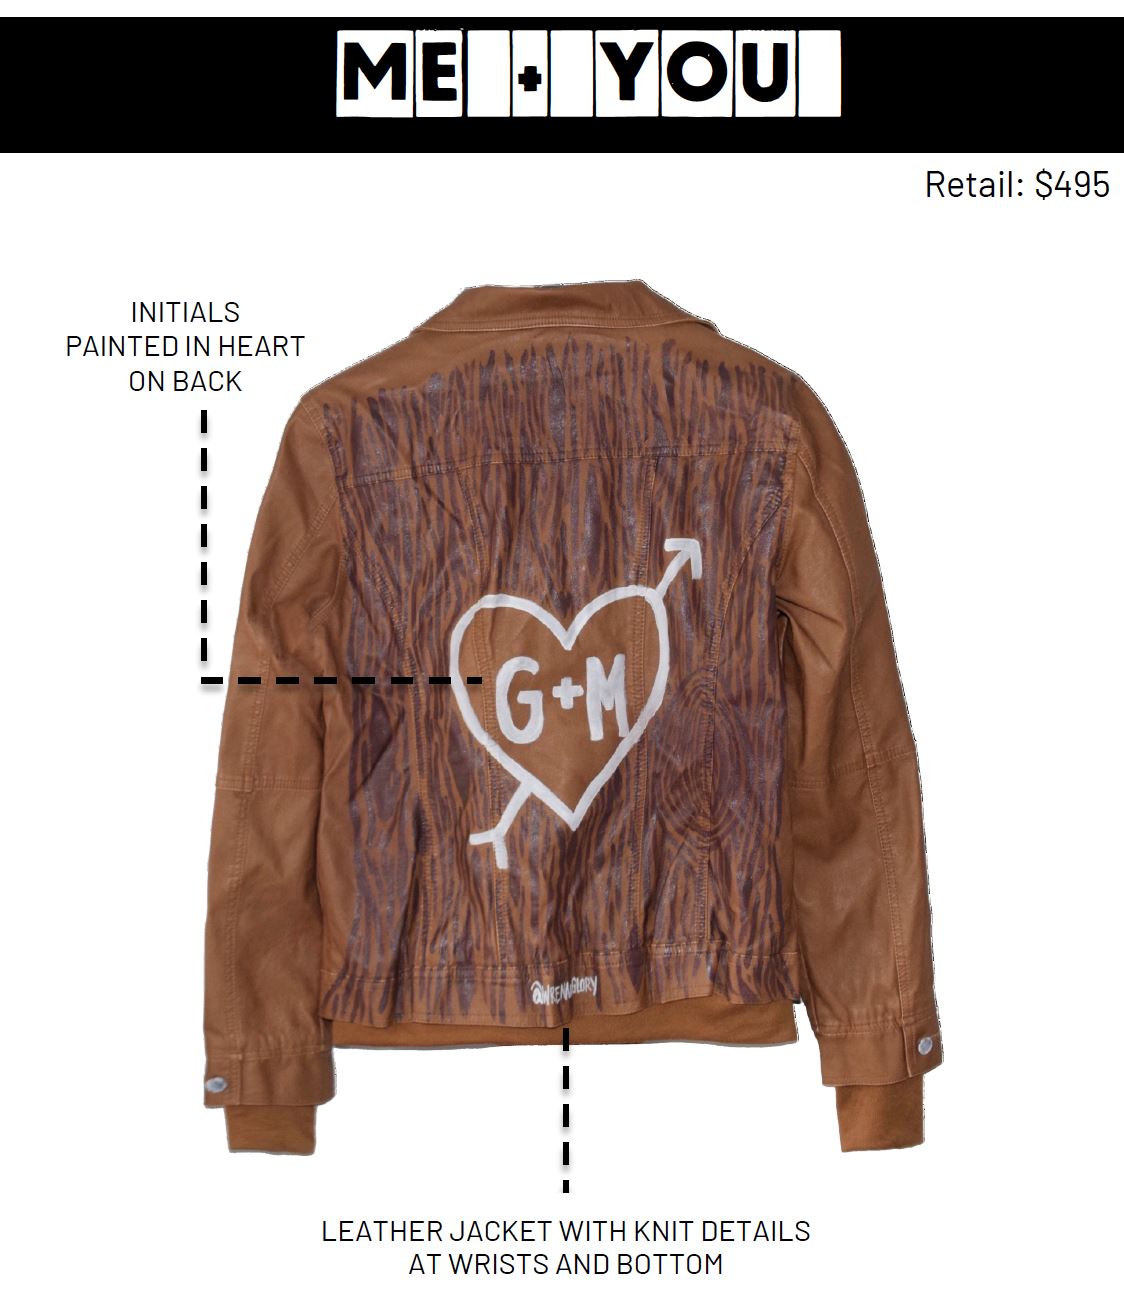 Light brown, faux leather jacket with tan sweatshirt lining the inside, with good and thumbholes at sleeves. Tree trunk painted across entire back in dark brown, with heart carved out and ' ___ + ___' painted inside. Please specify names above. Signed @wrenandglory.